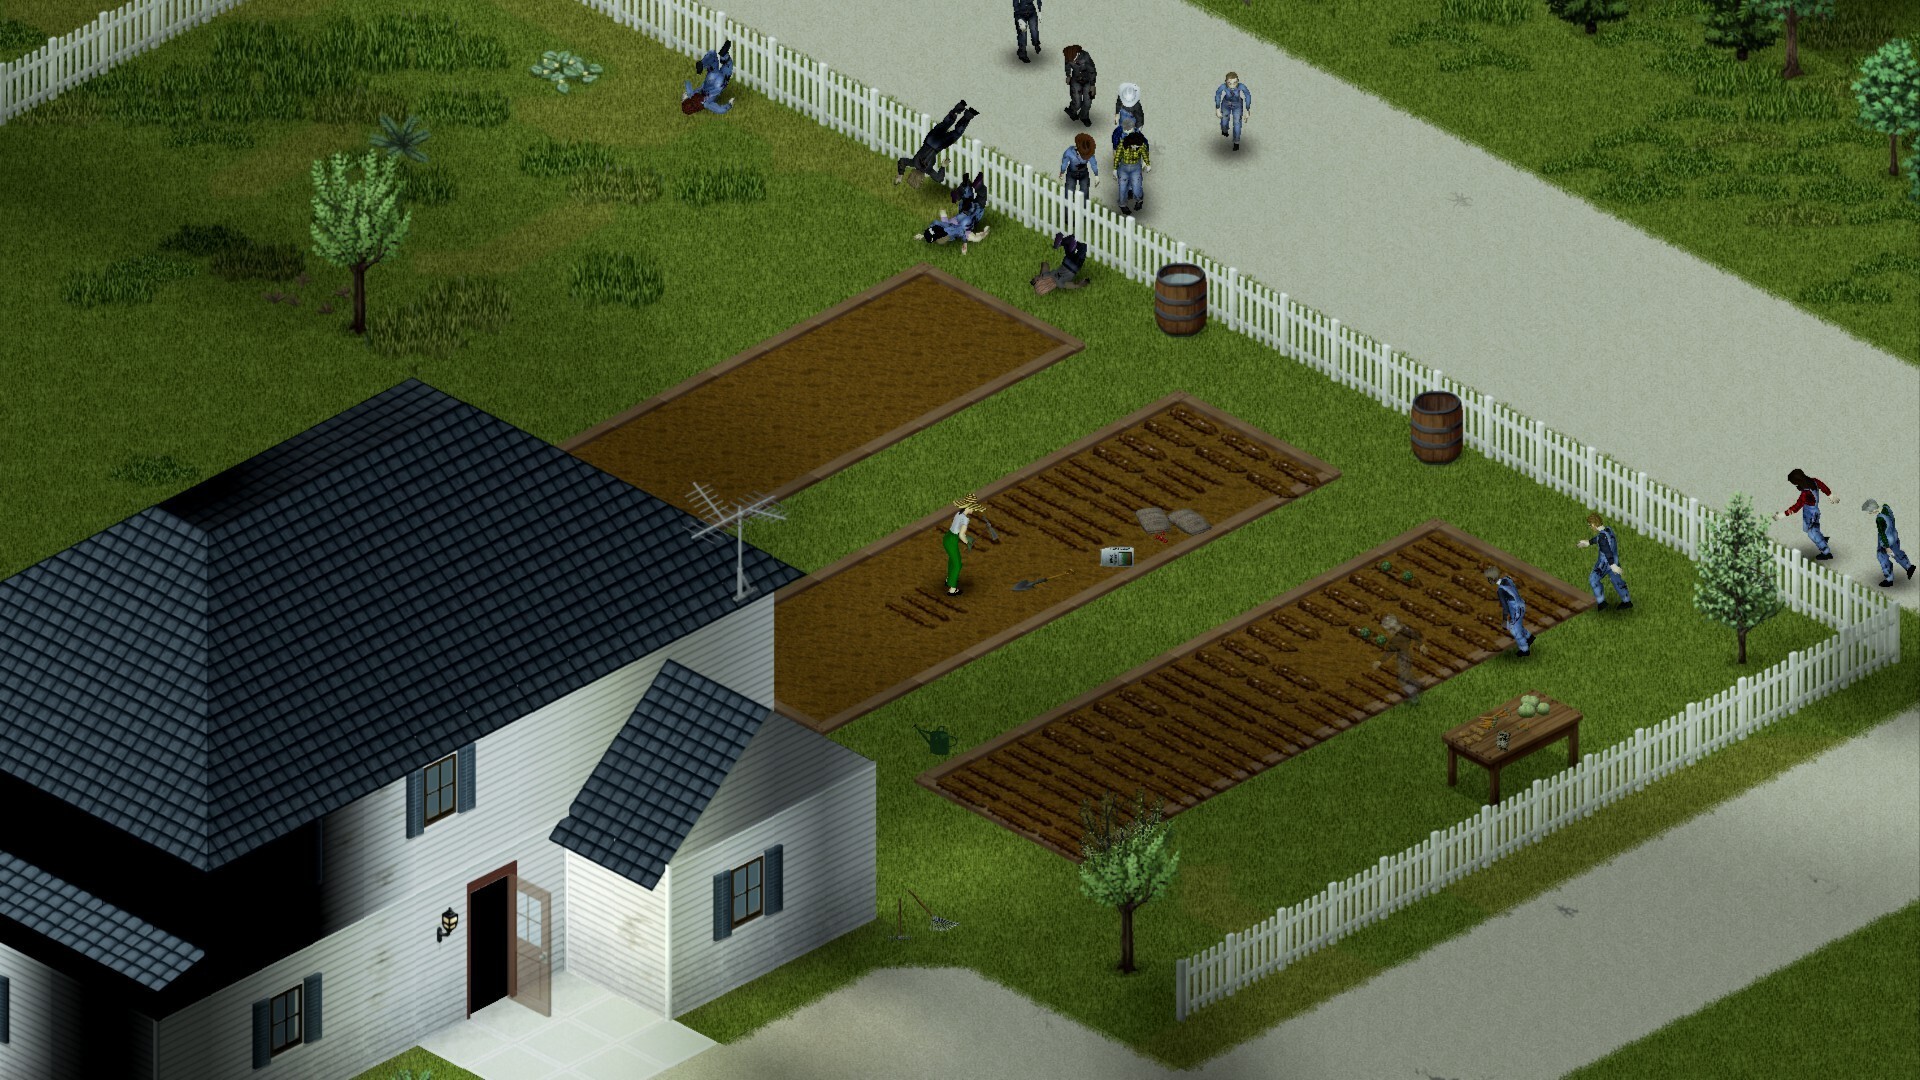 project zomboid free download meadfire